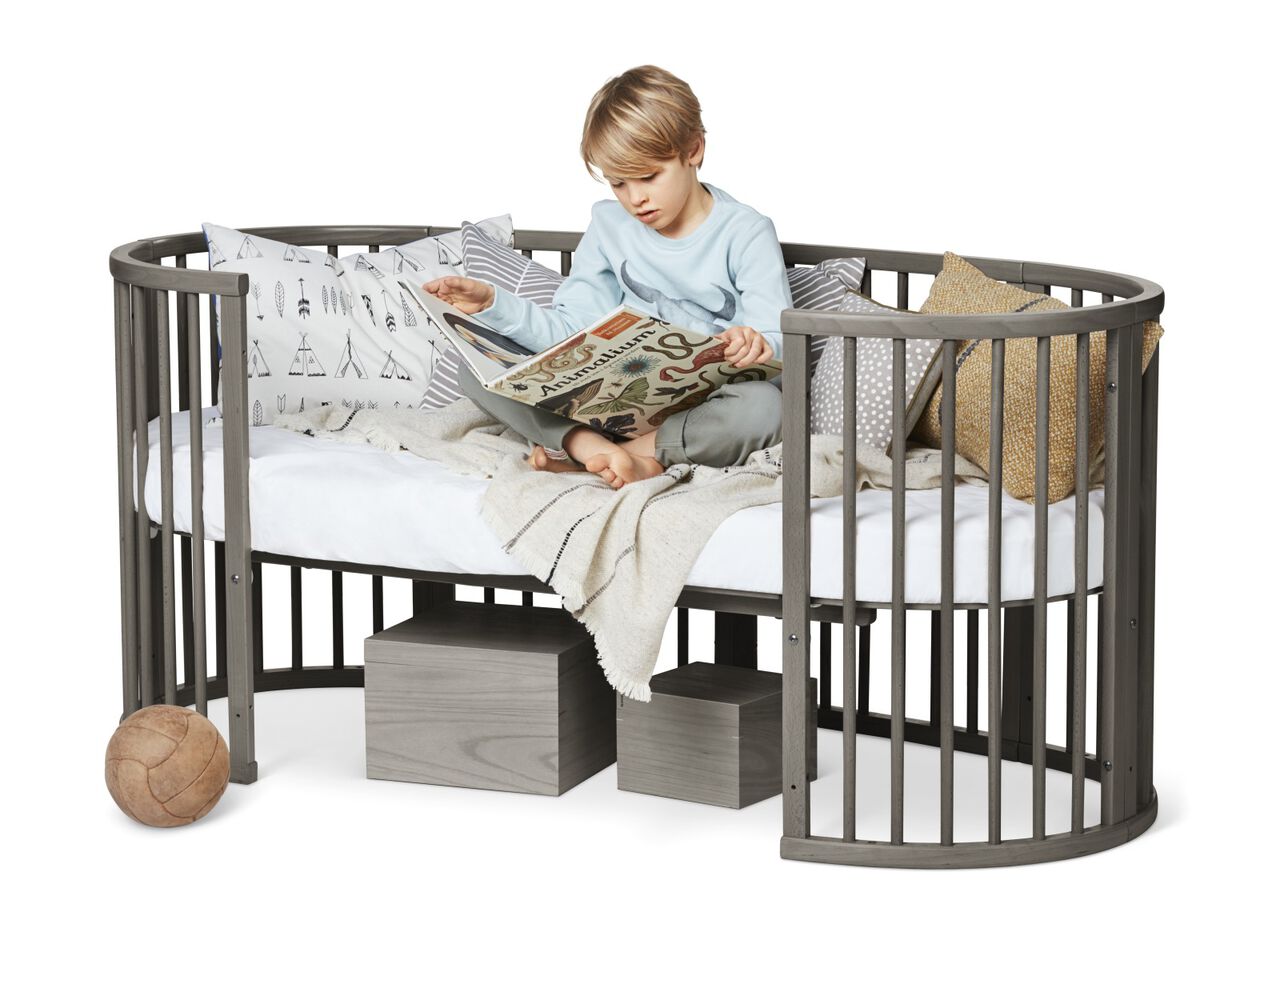 stokke change table mattress cover